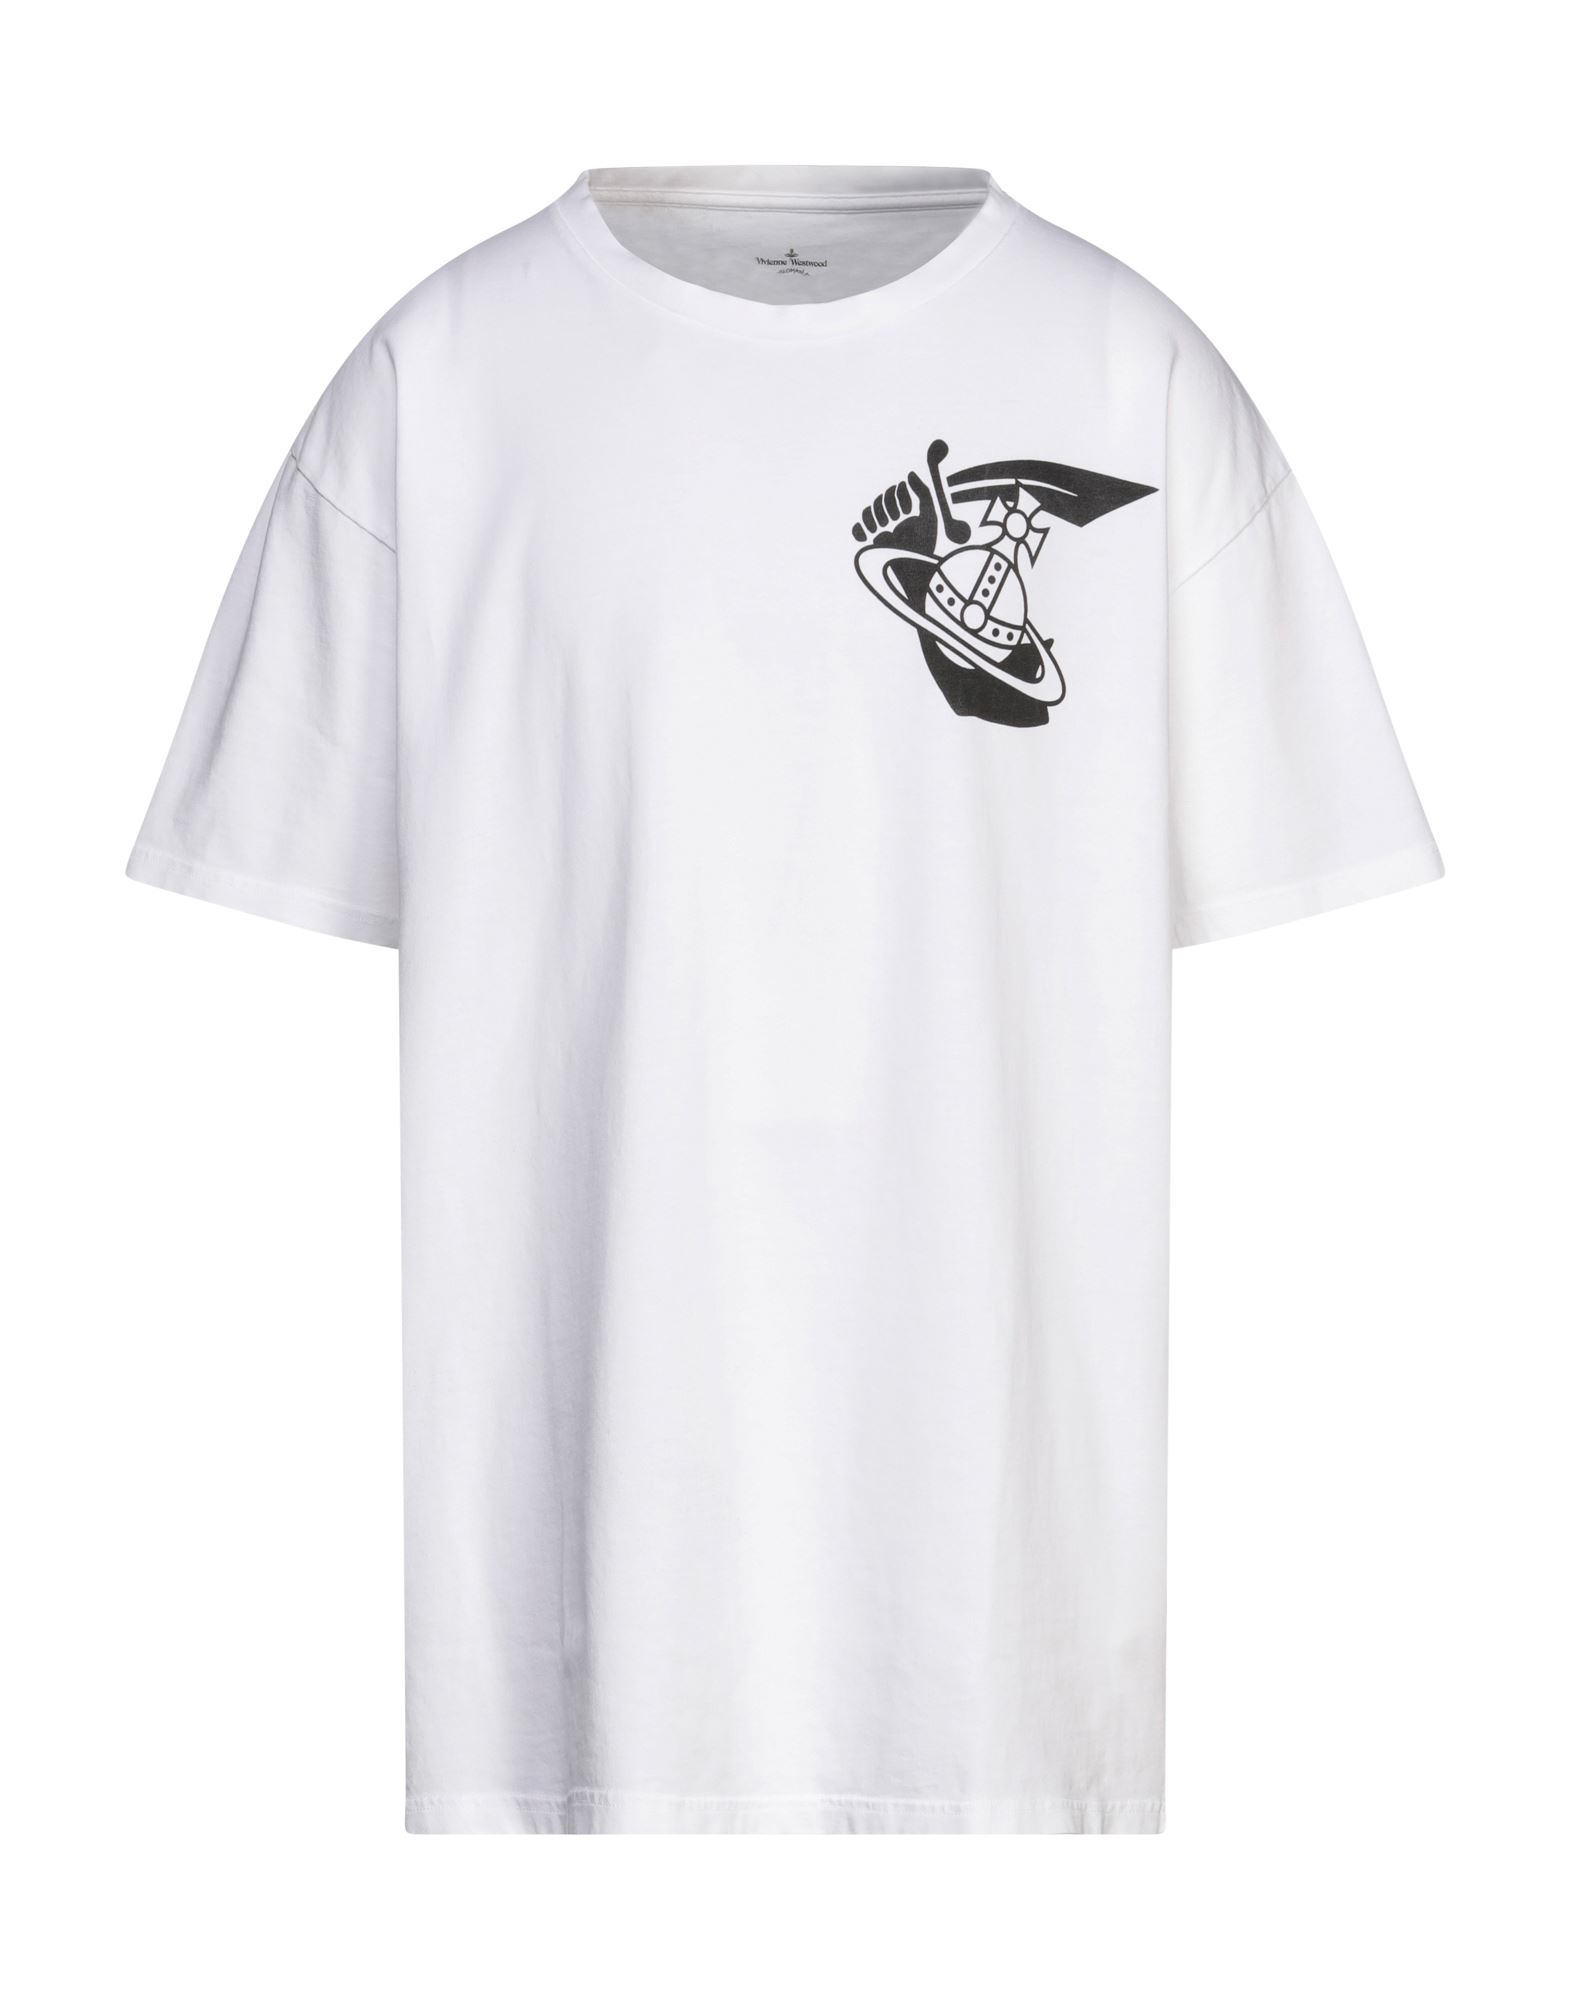 Vivienne Westwood Anglomania T-shirts In White